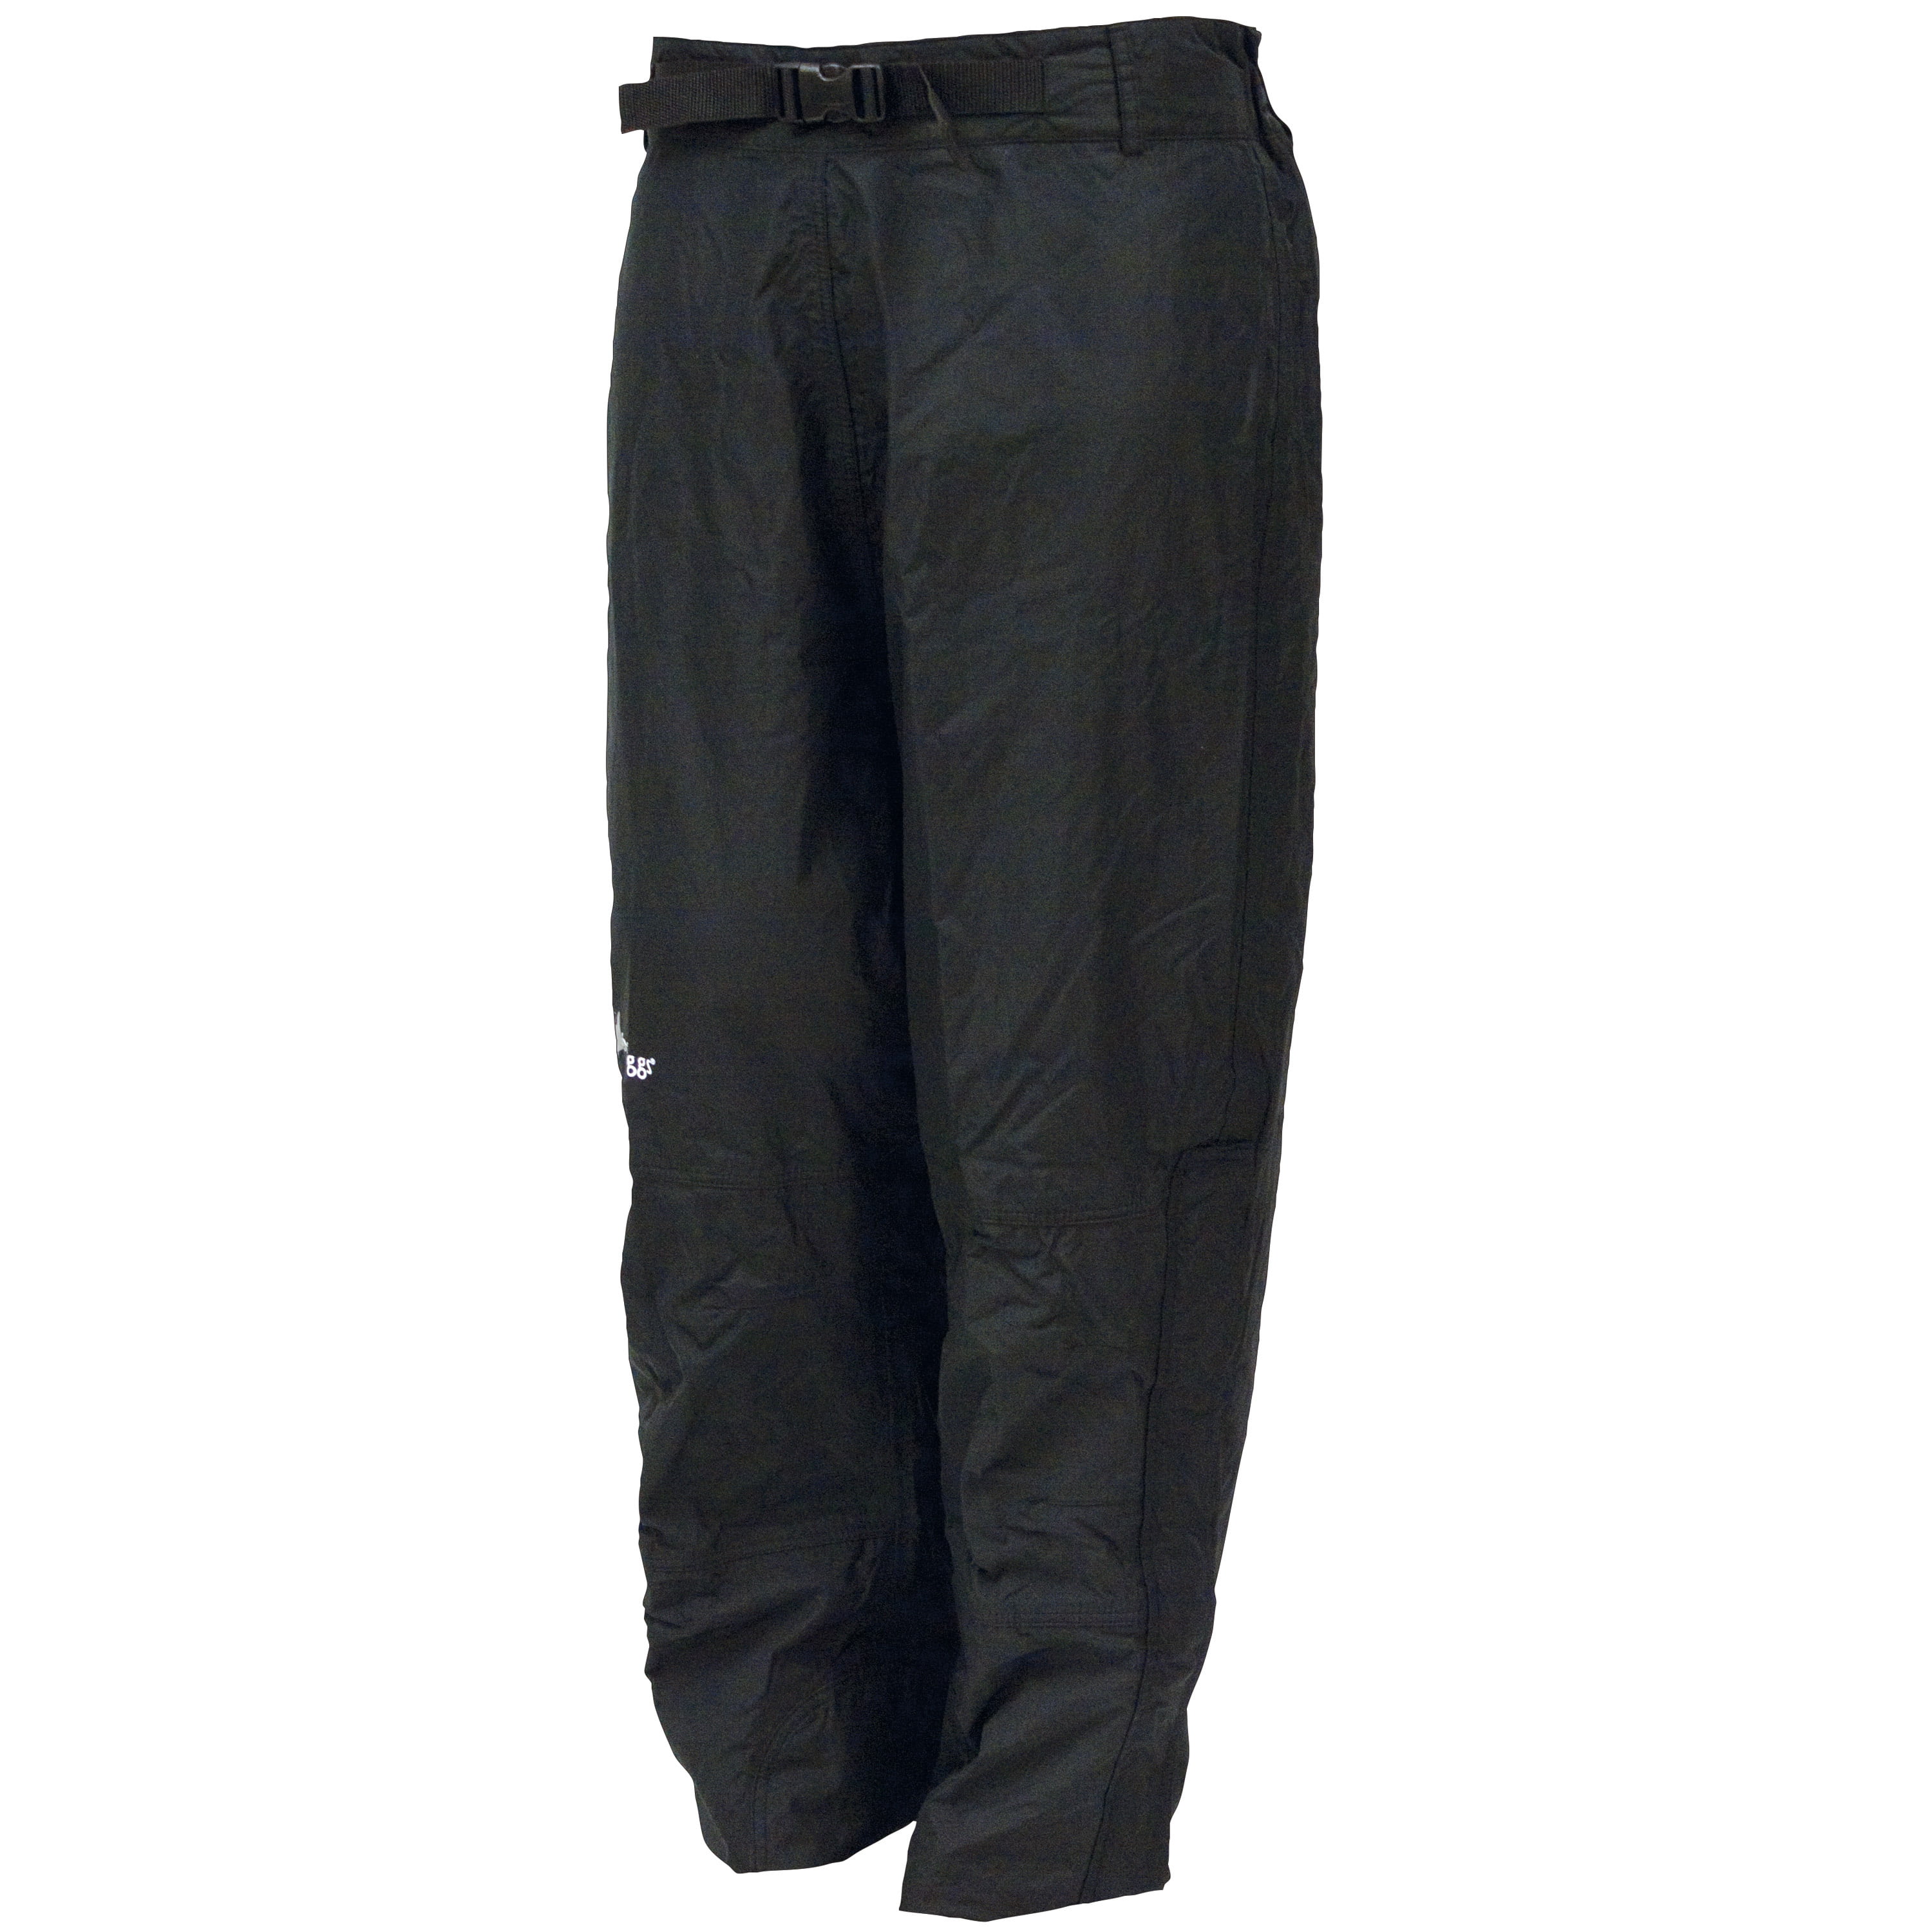 Frogg Toggs Toadz HD Water-Resistant Pant 